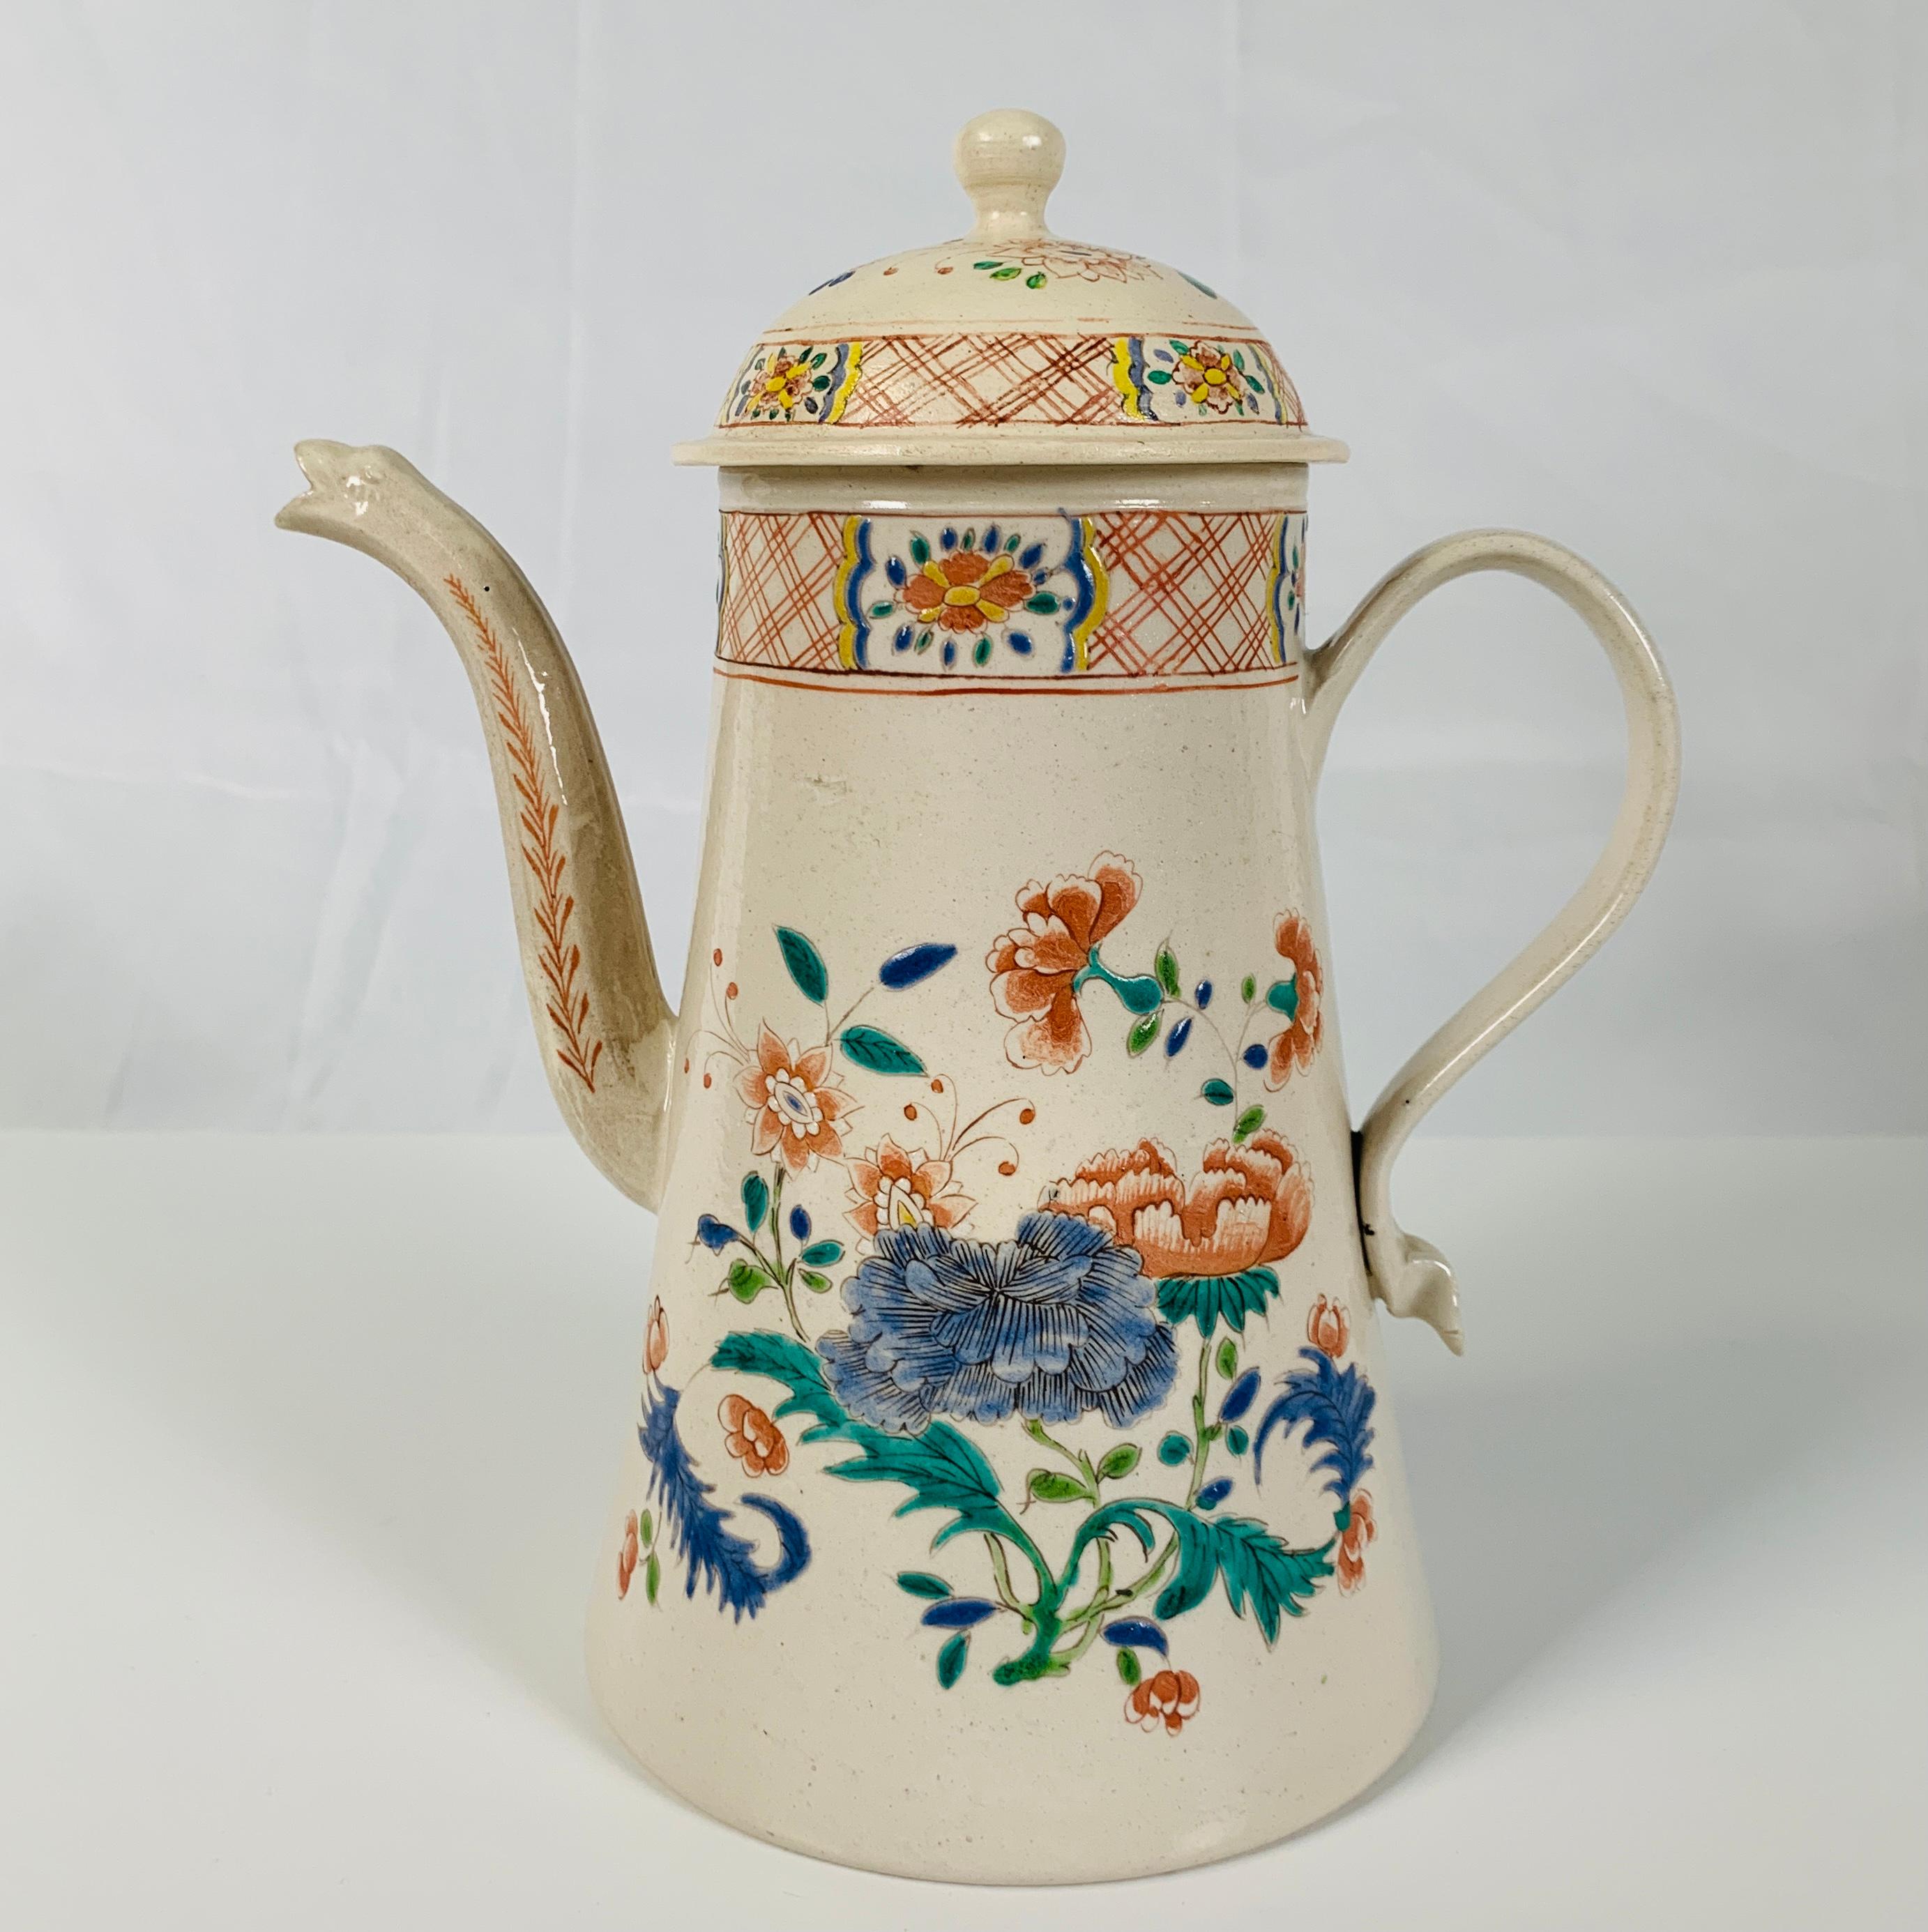 Chinoiserie Antique Salt-Glazed Teapot Made in Mid-18th Century, England